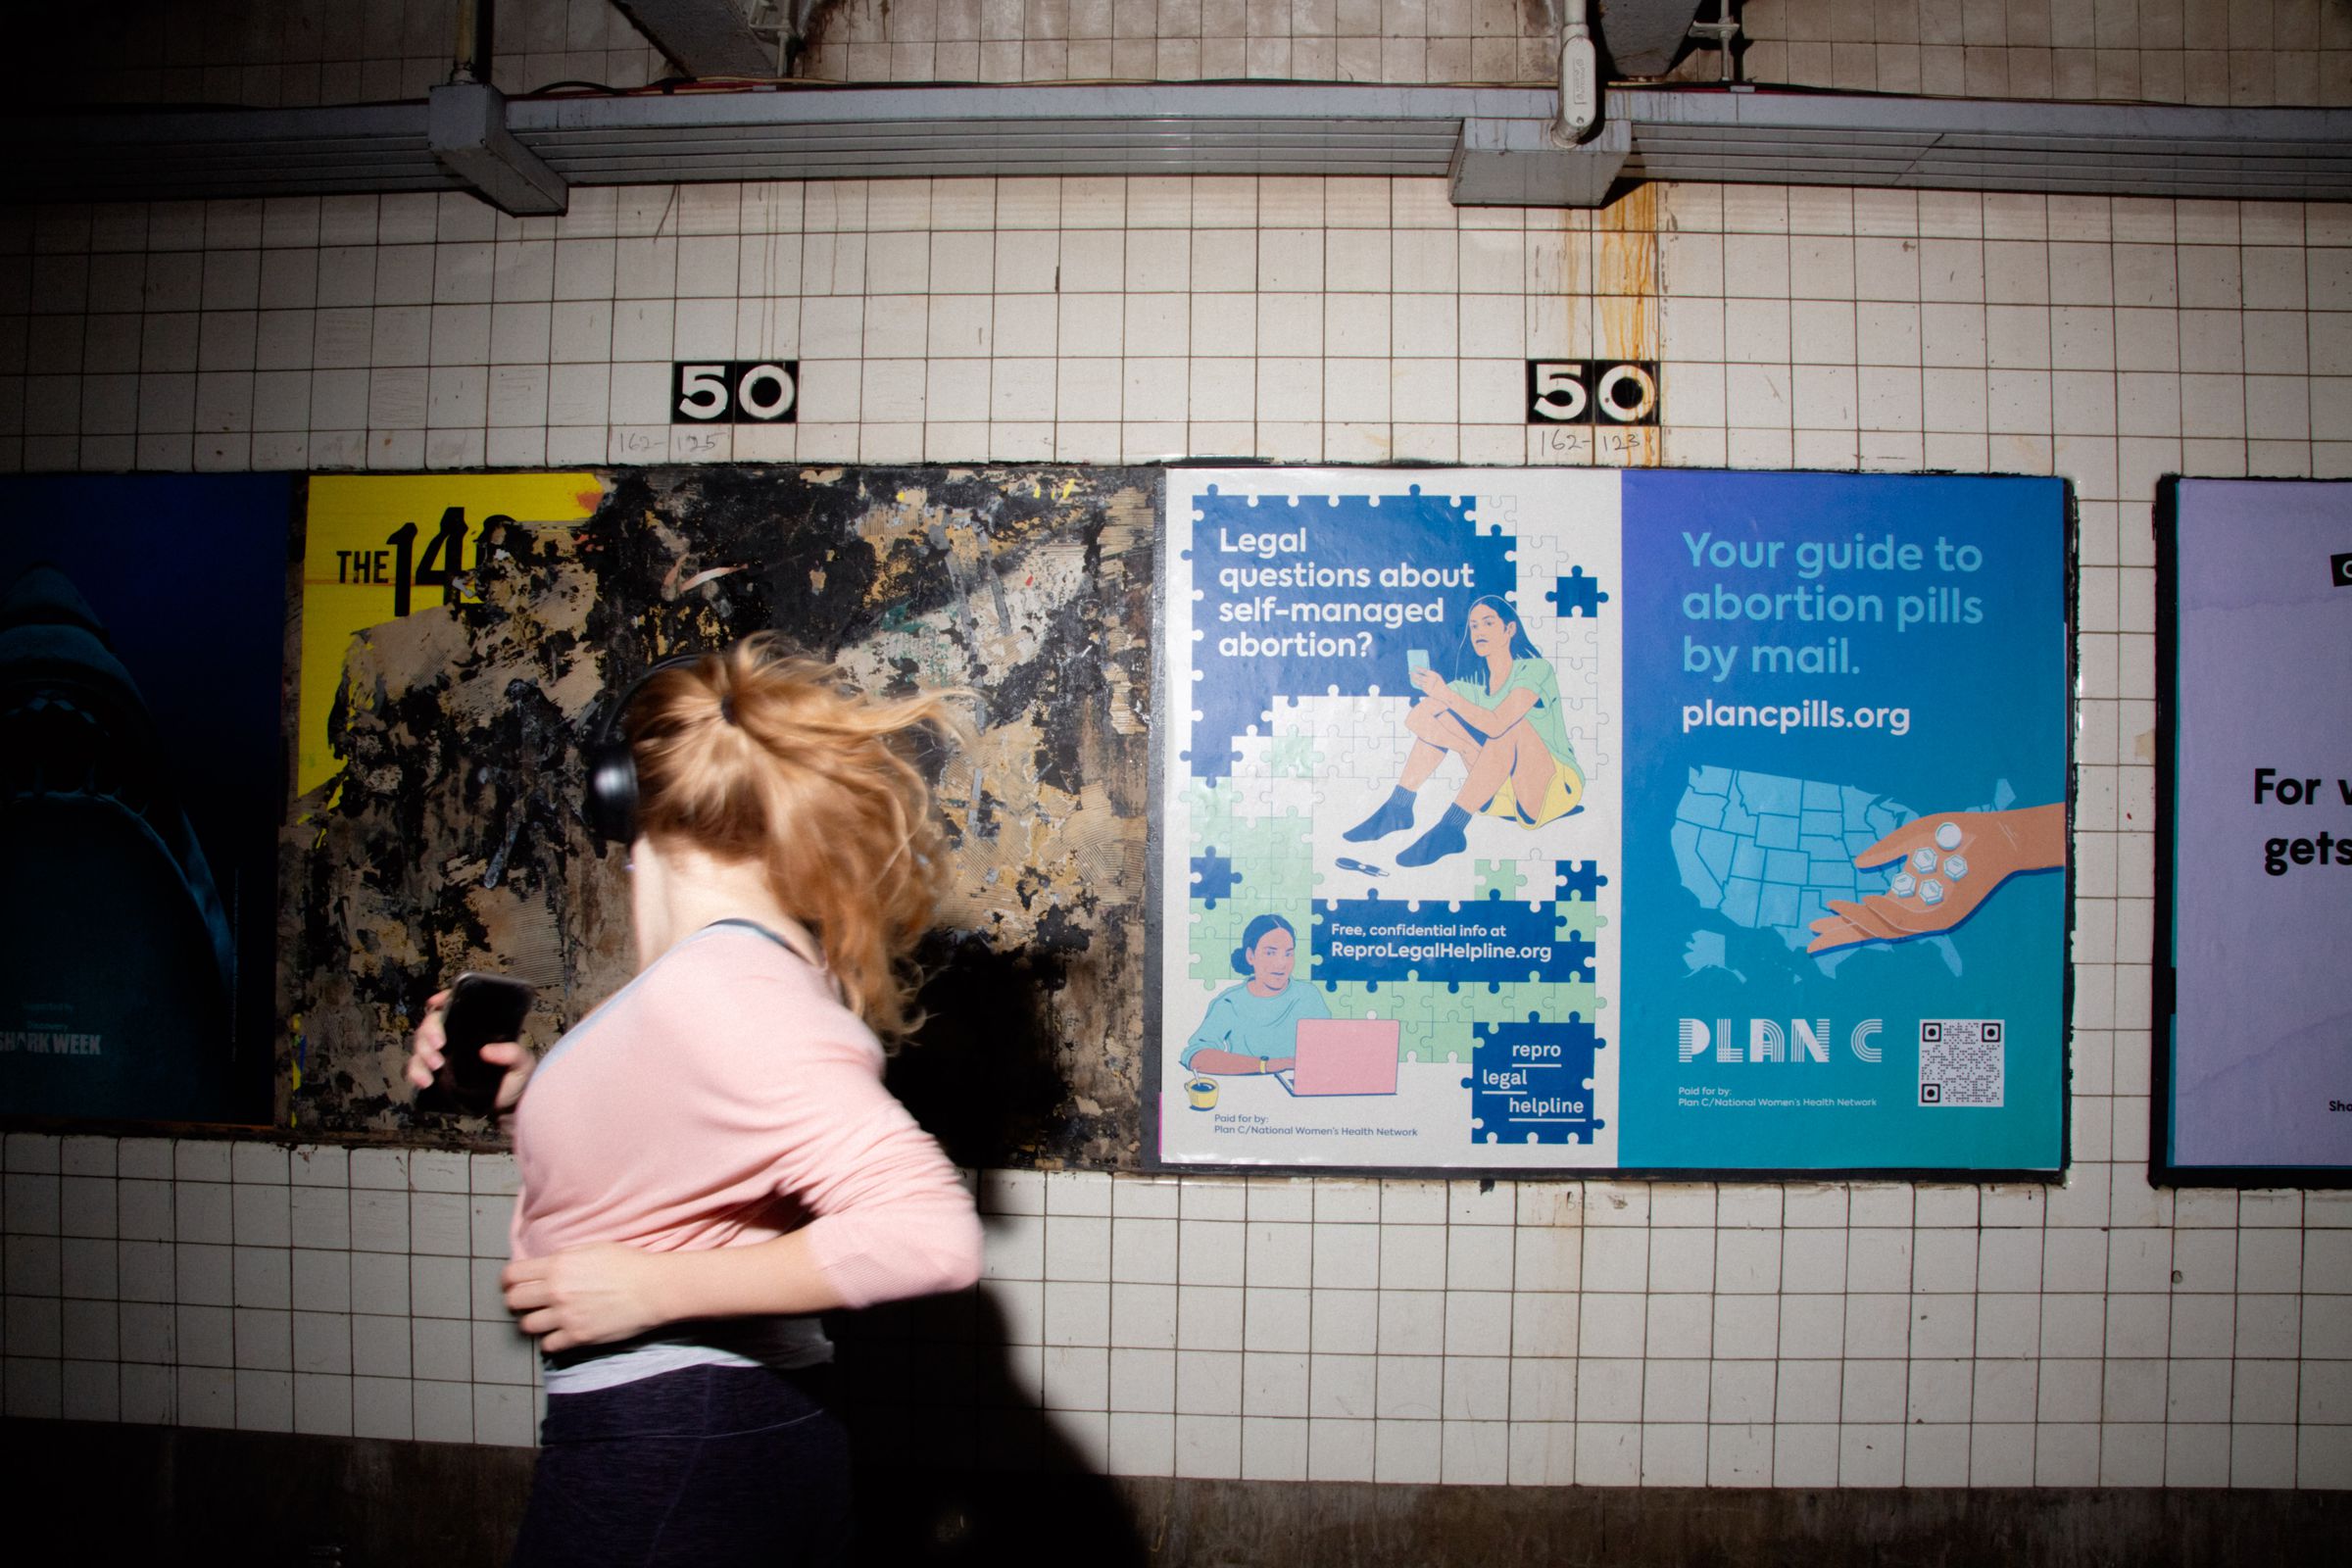 A woman running by an advertisement for Plan C in the New York City subway.